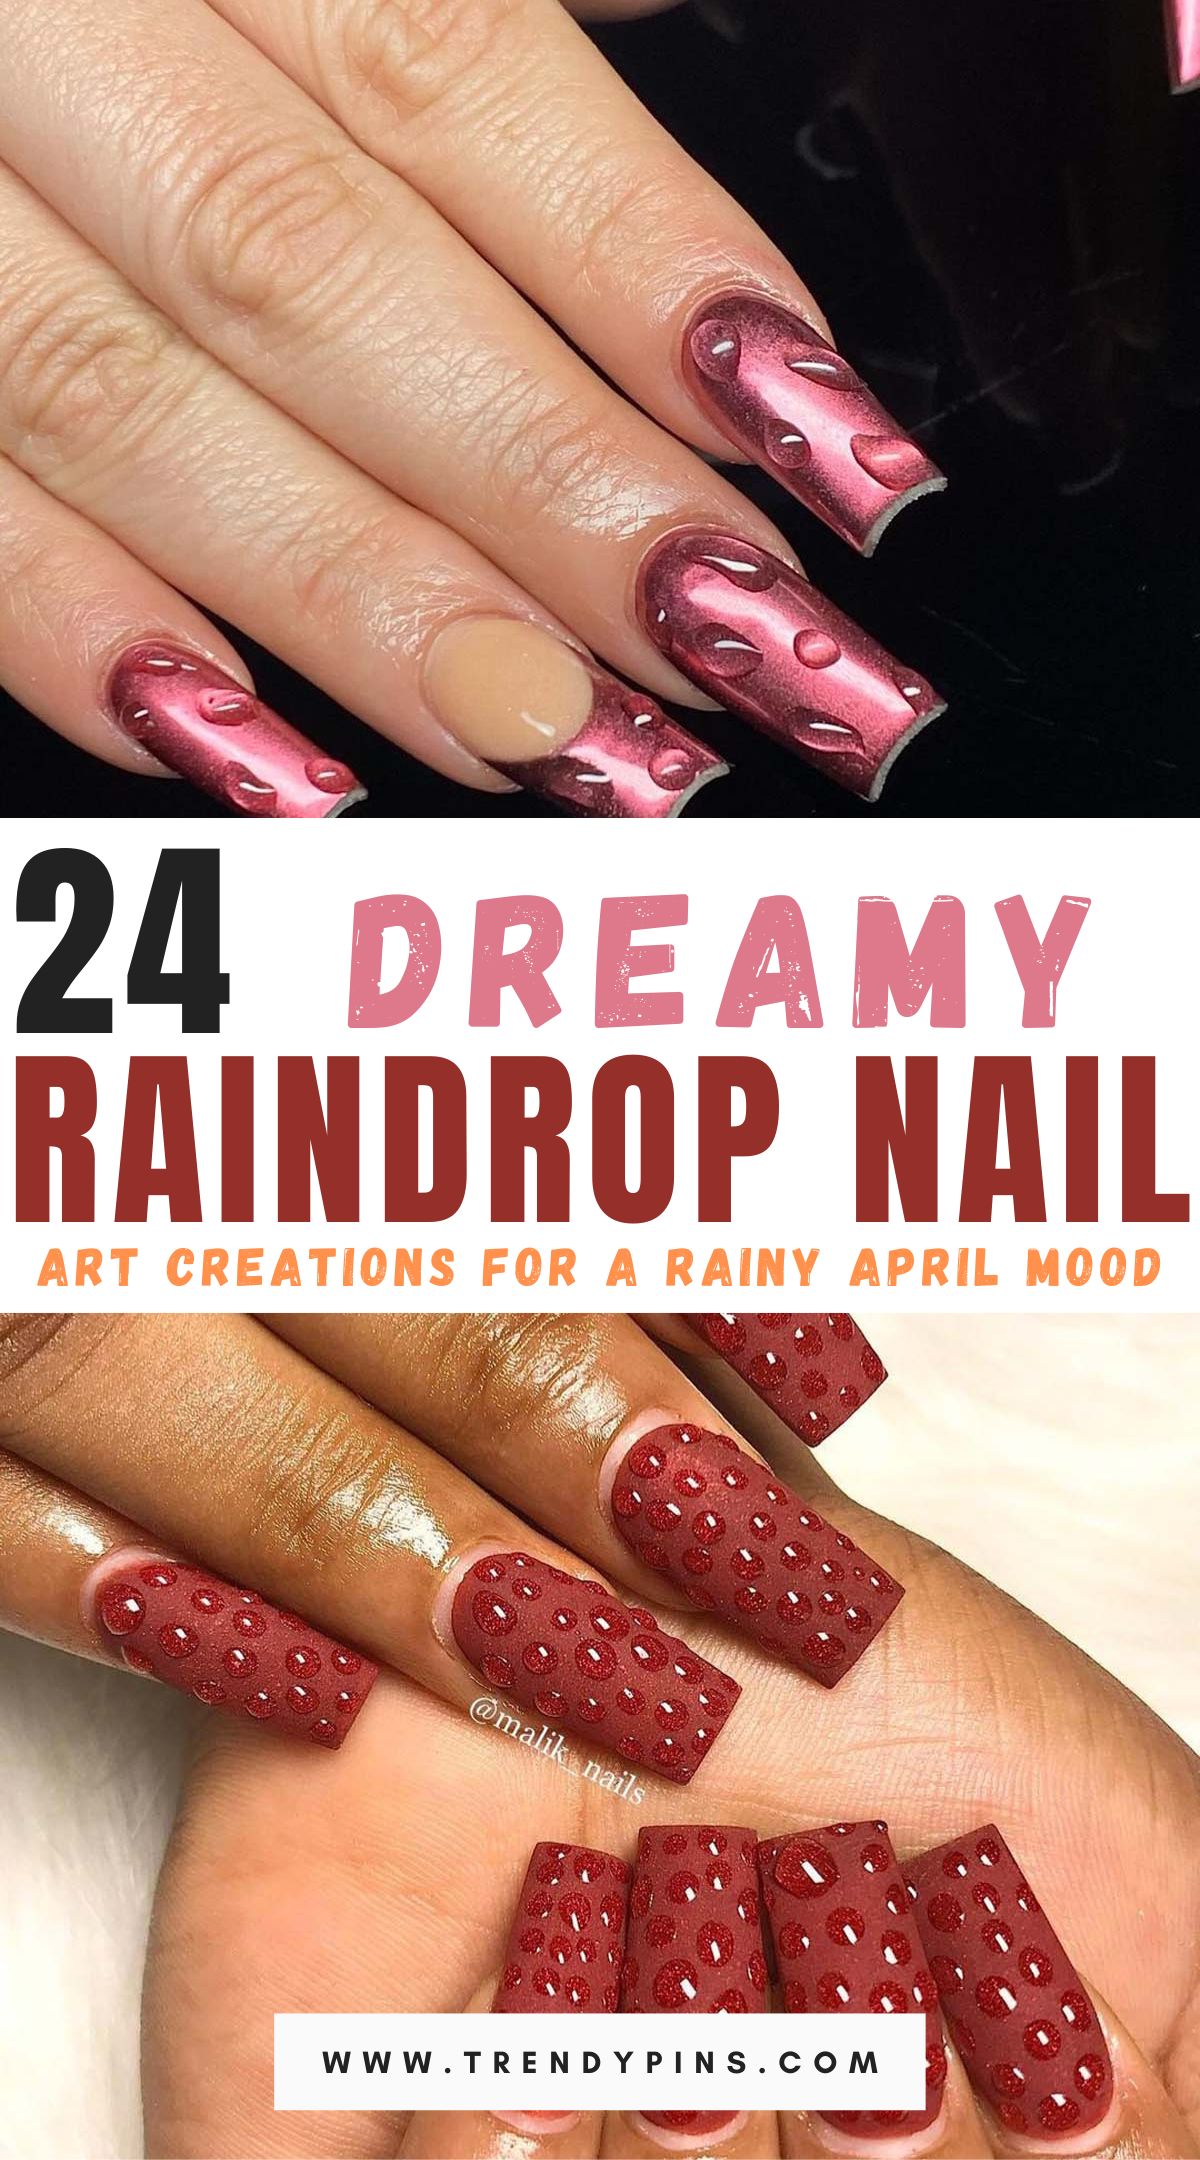 Best Raindrop Nail Inspirations For April